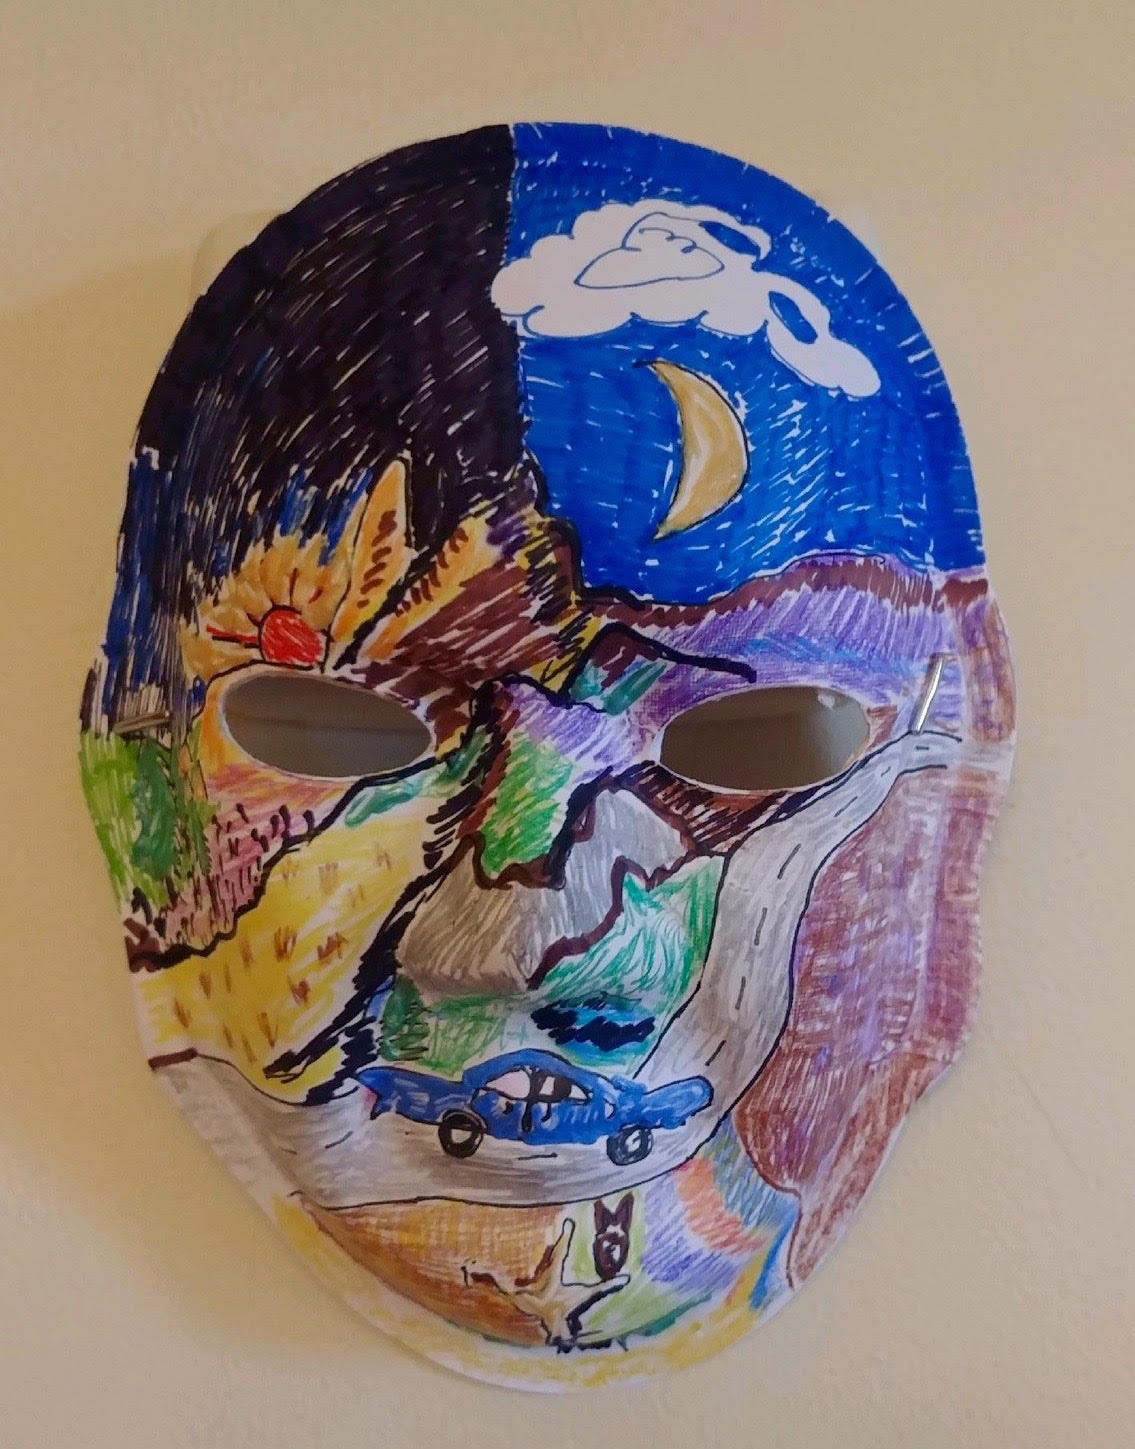 Over 400 Masks On Display in 'Stay Safe' Mask Exhibit in Manistee – 9&10  News